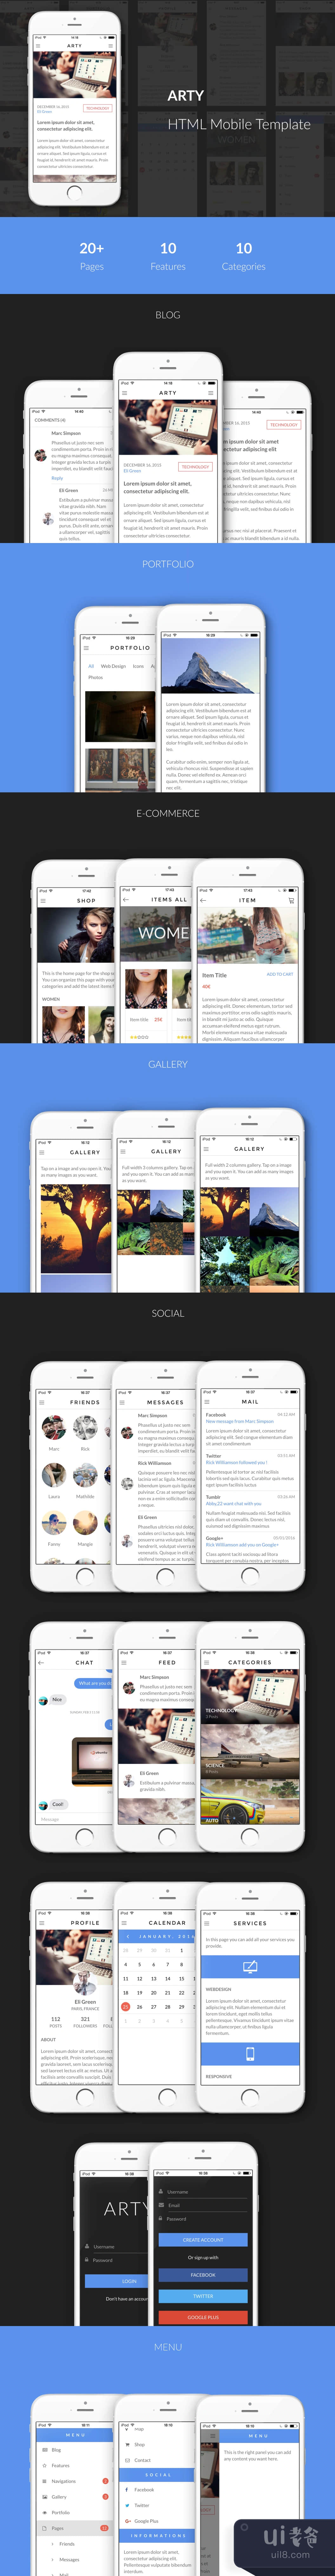 Arty HTML移动模板 (Arty HTML Mobile Template)插图